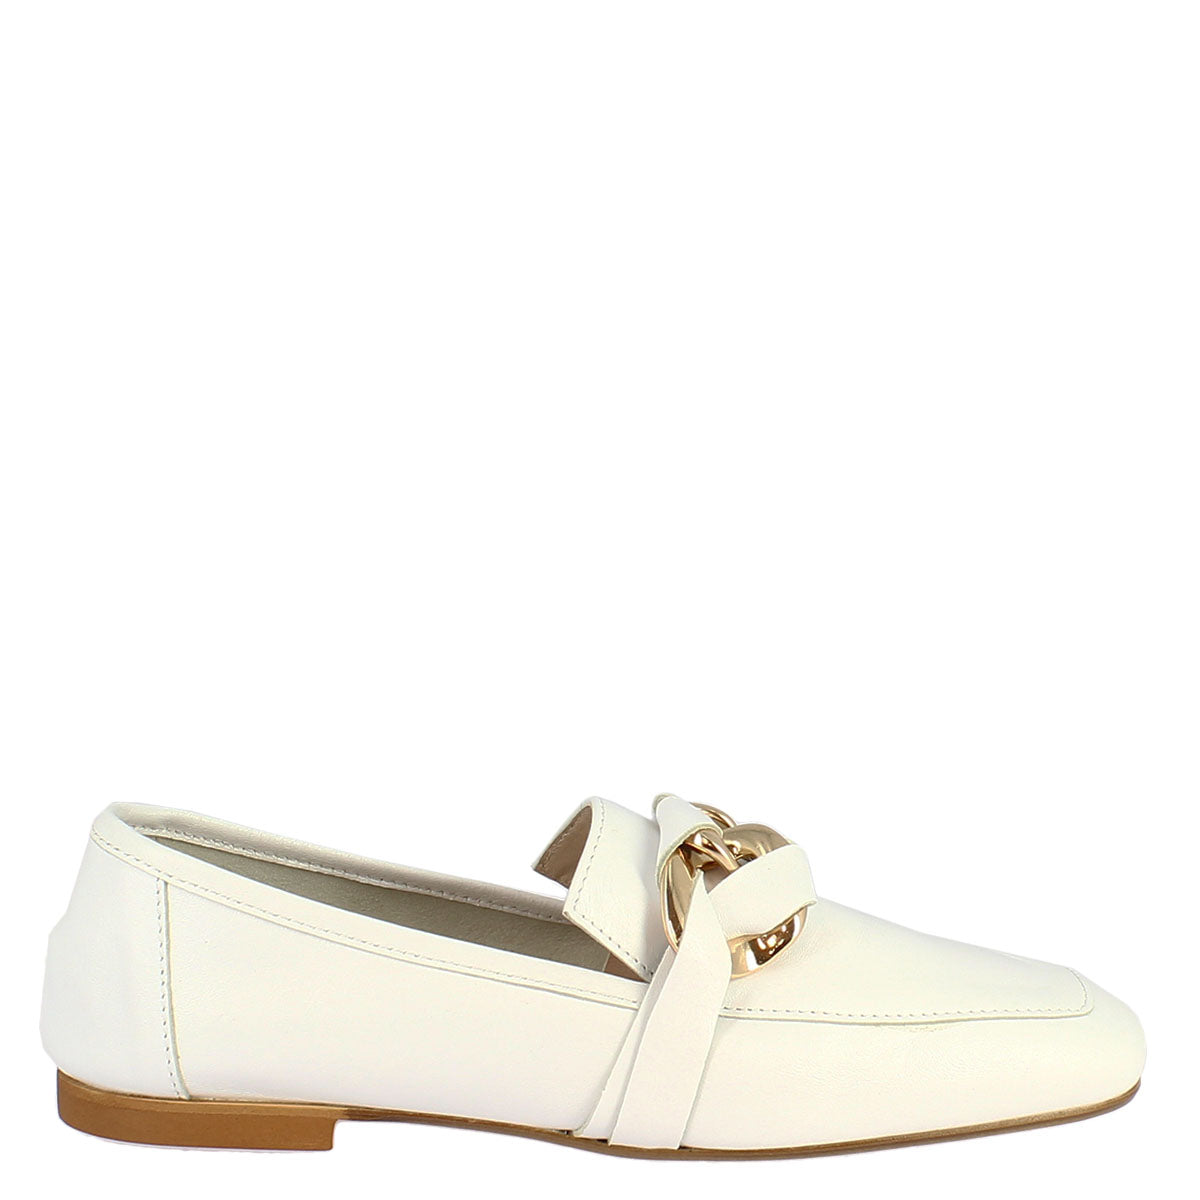 Women's moccasin in white calf leather handmade with decorated clamp.